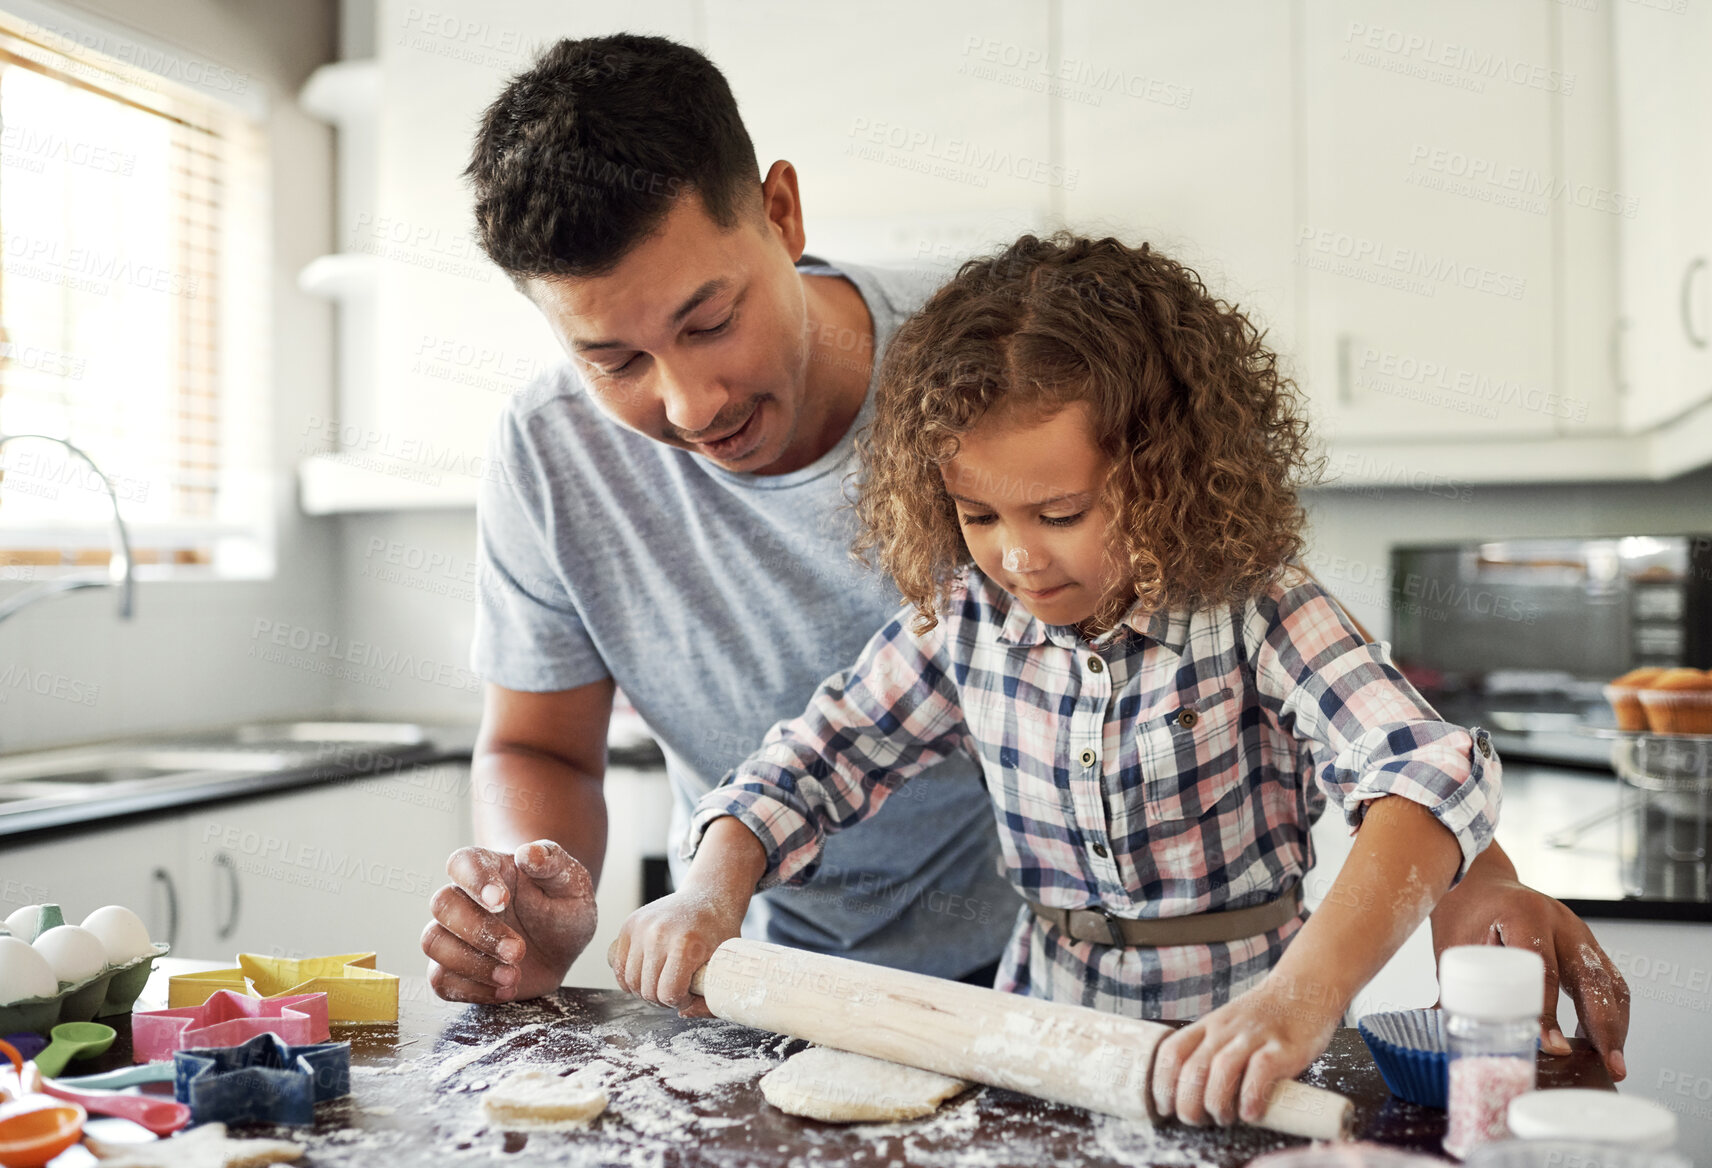 Buy stock photo Shot of a sweet little girl baking with her father at home in the kitchen